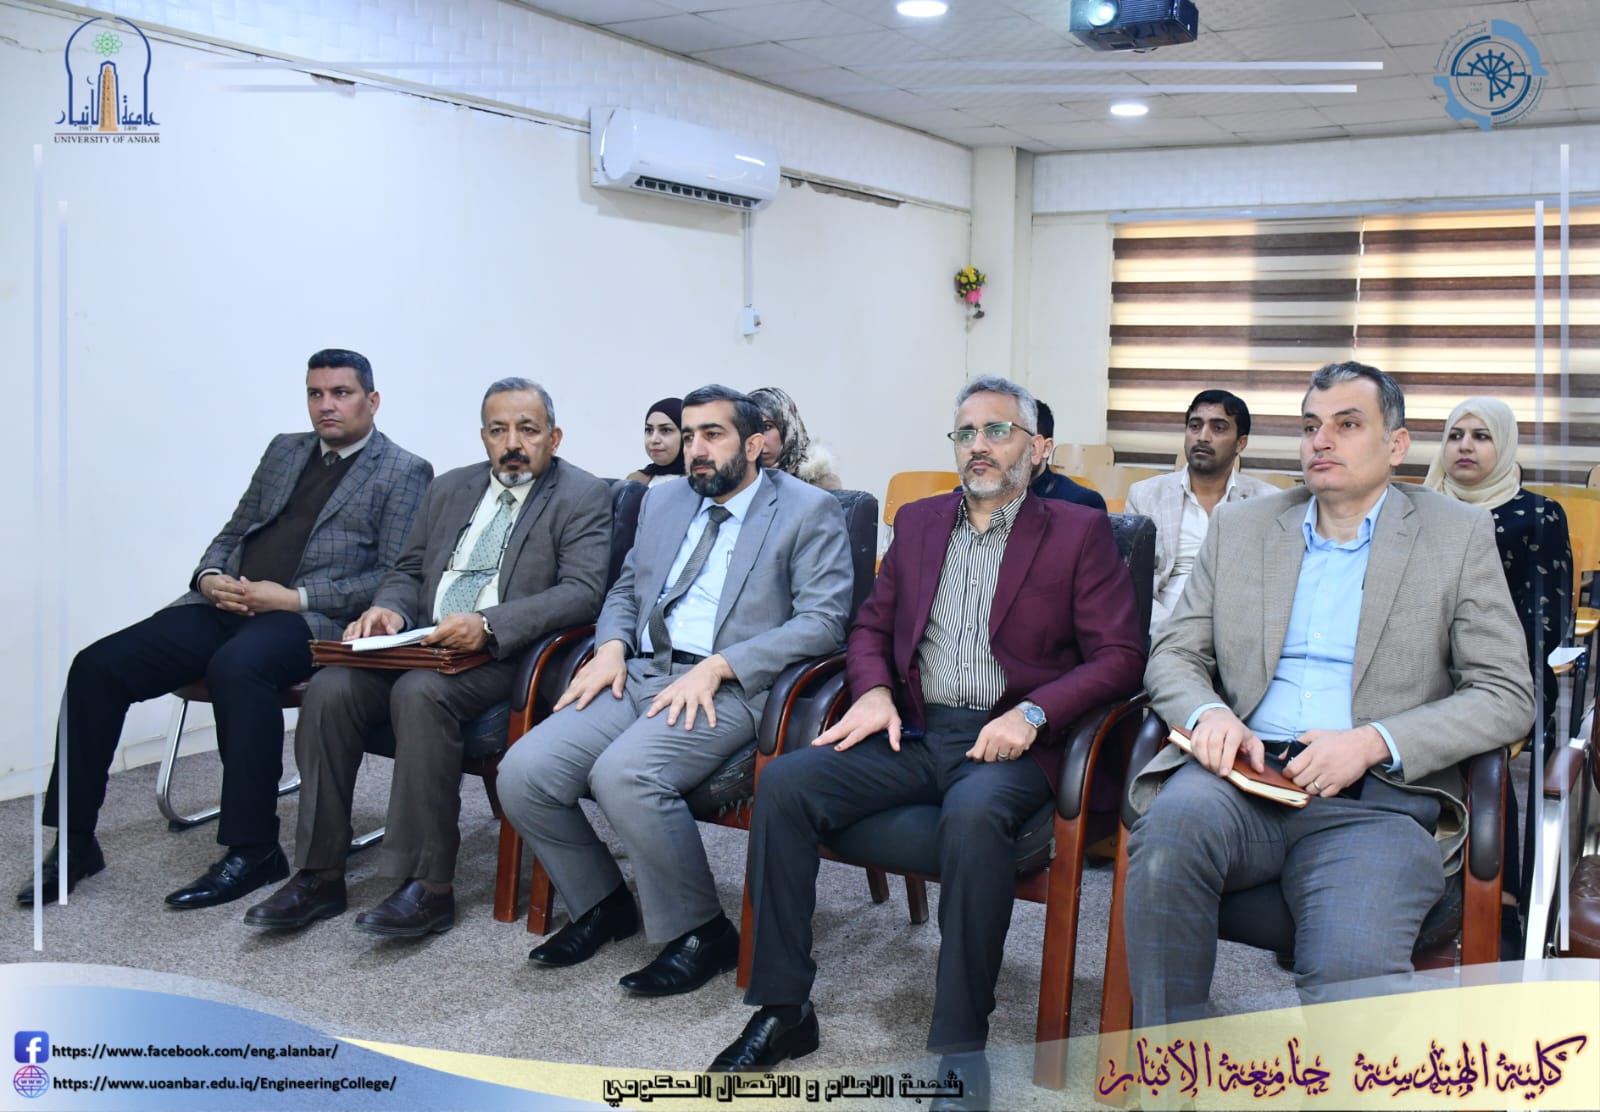  A seminar for graduate students in the Department of Mechanical Engineering